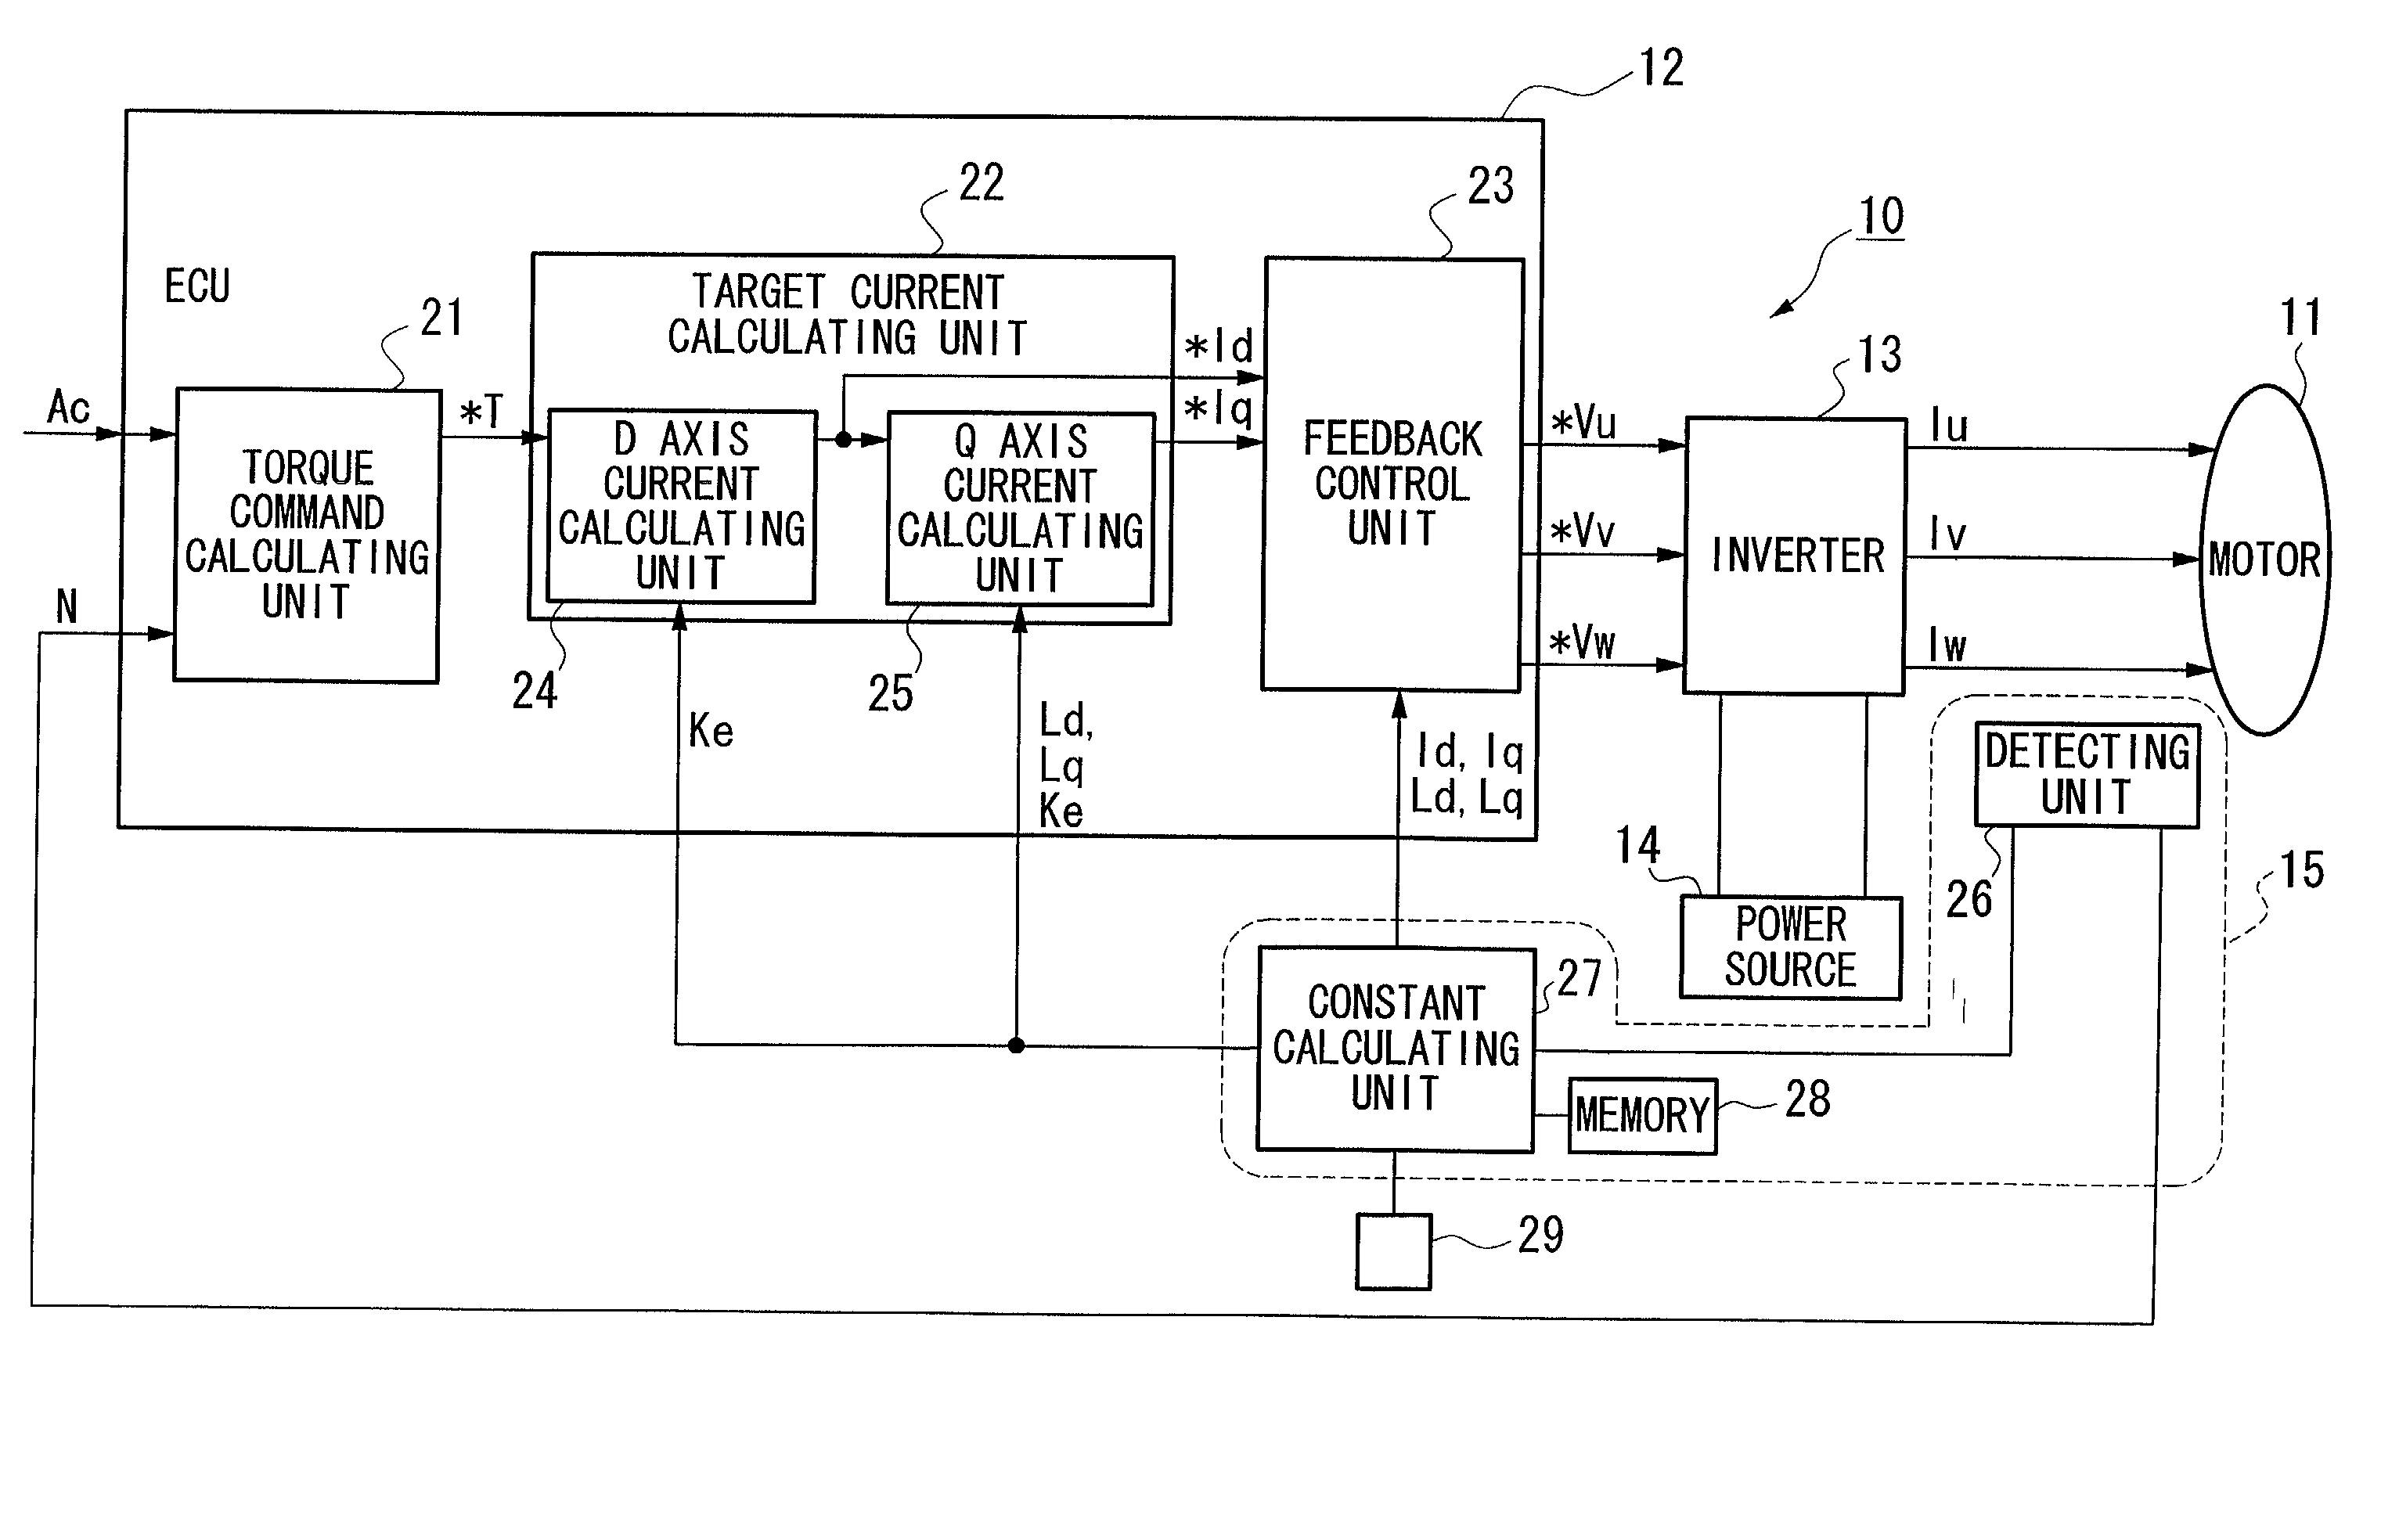 Constant detecting apparatus for brushless DC motor, control apparatus for brushless DC motor, and program for detecting constant of brushless DC motor